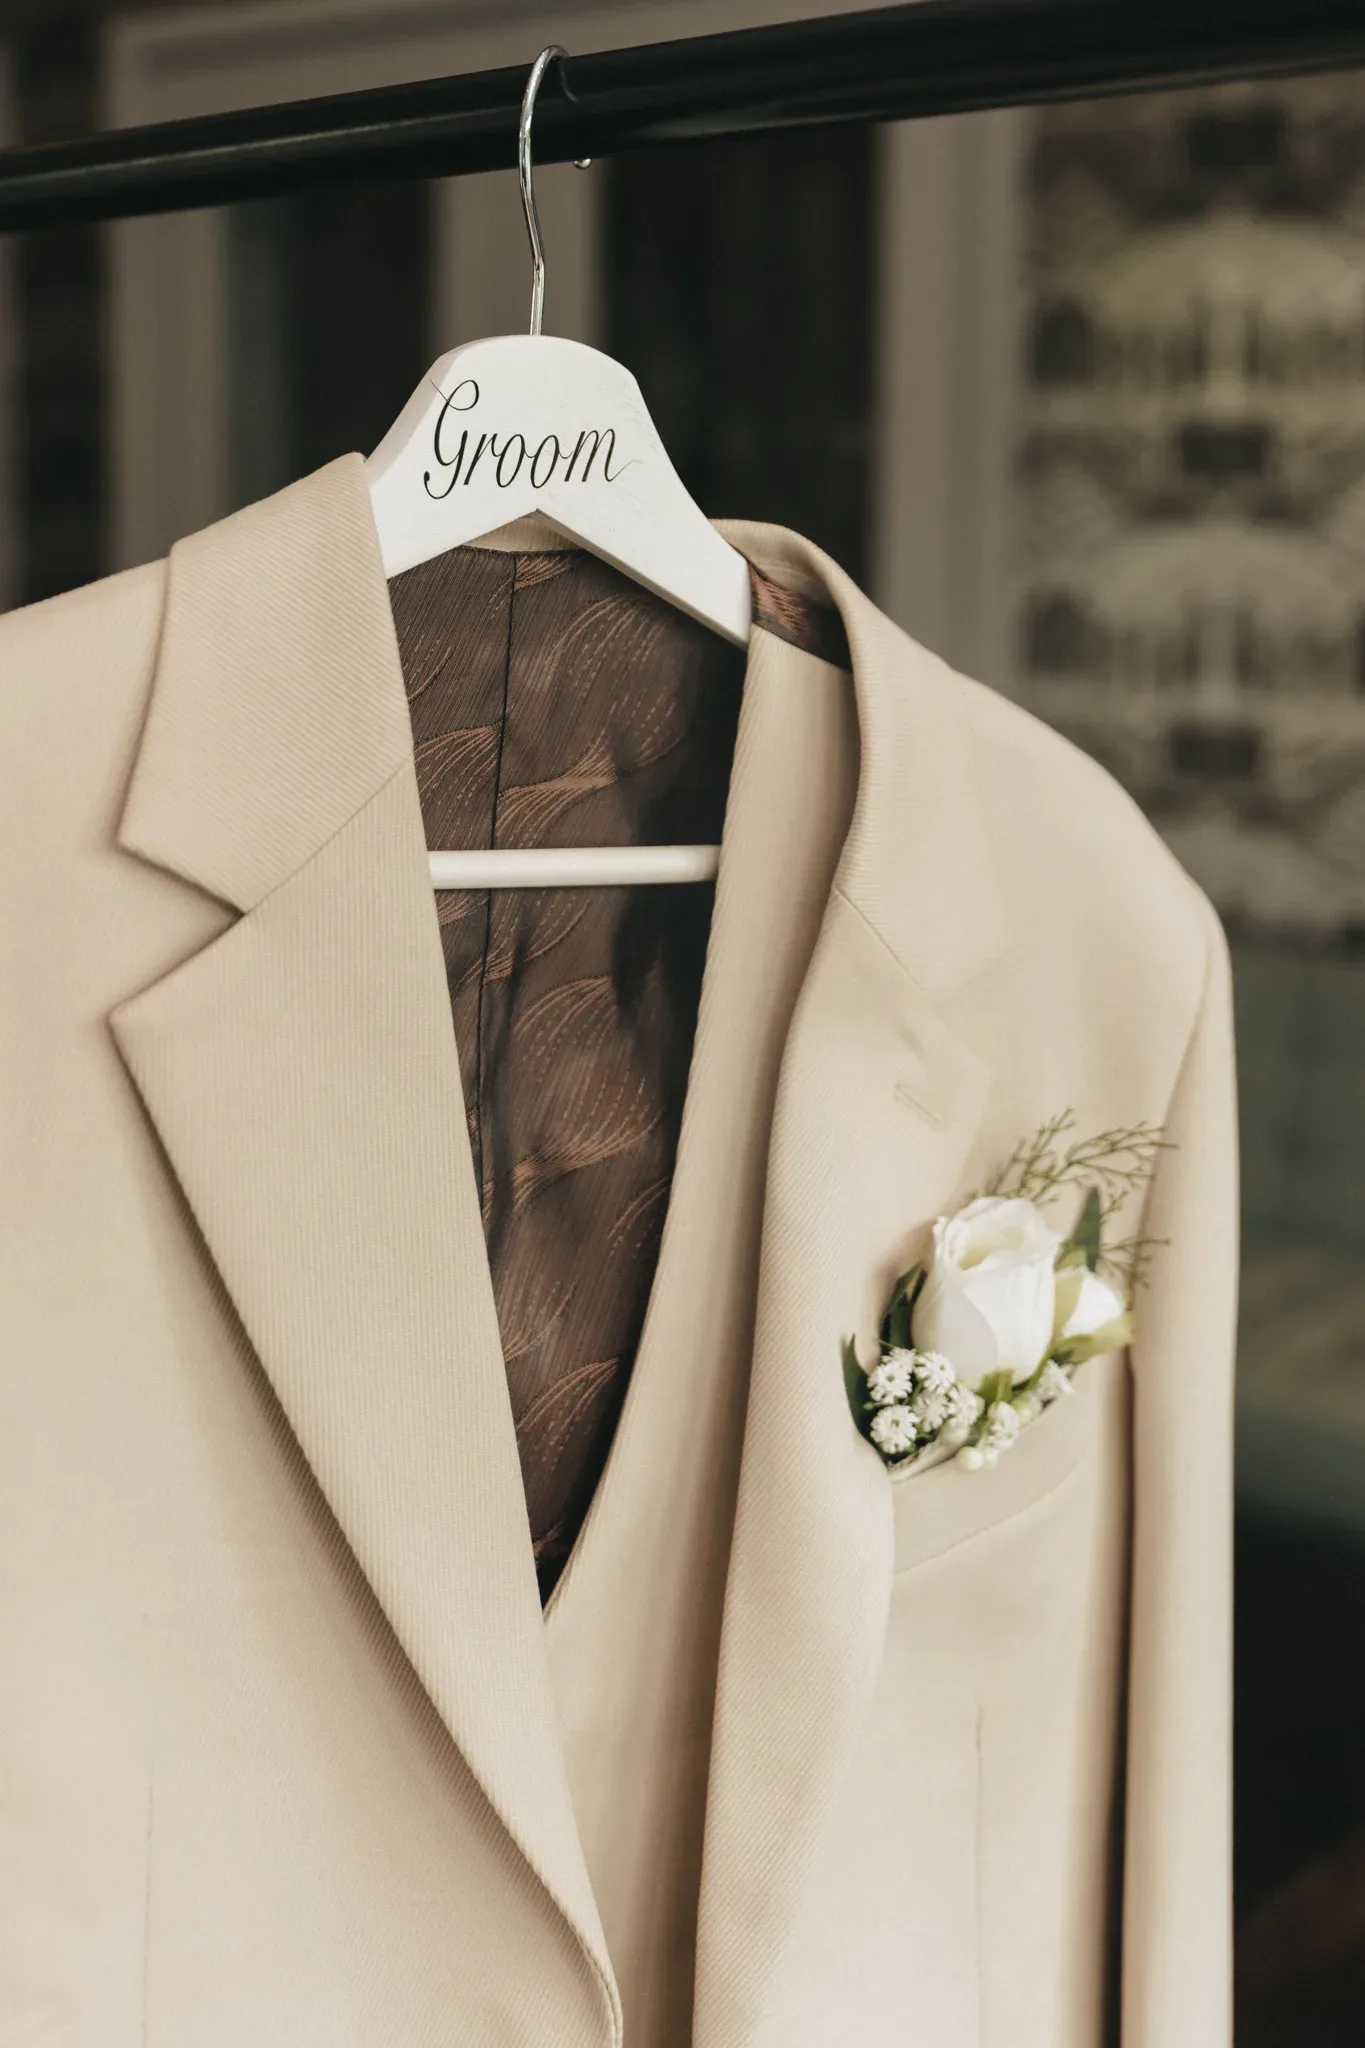 A beige groom's suit hangs on a wooden hanger labeled "groom," featuring a boutonniere with white roses and greenery on the lapel, set against a softly blurred background.